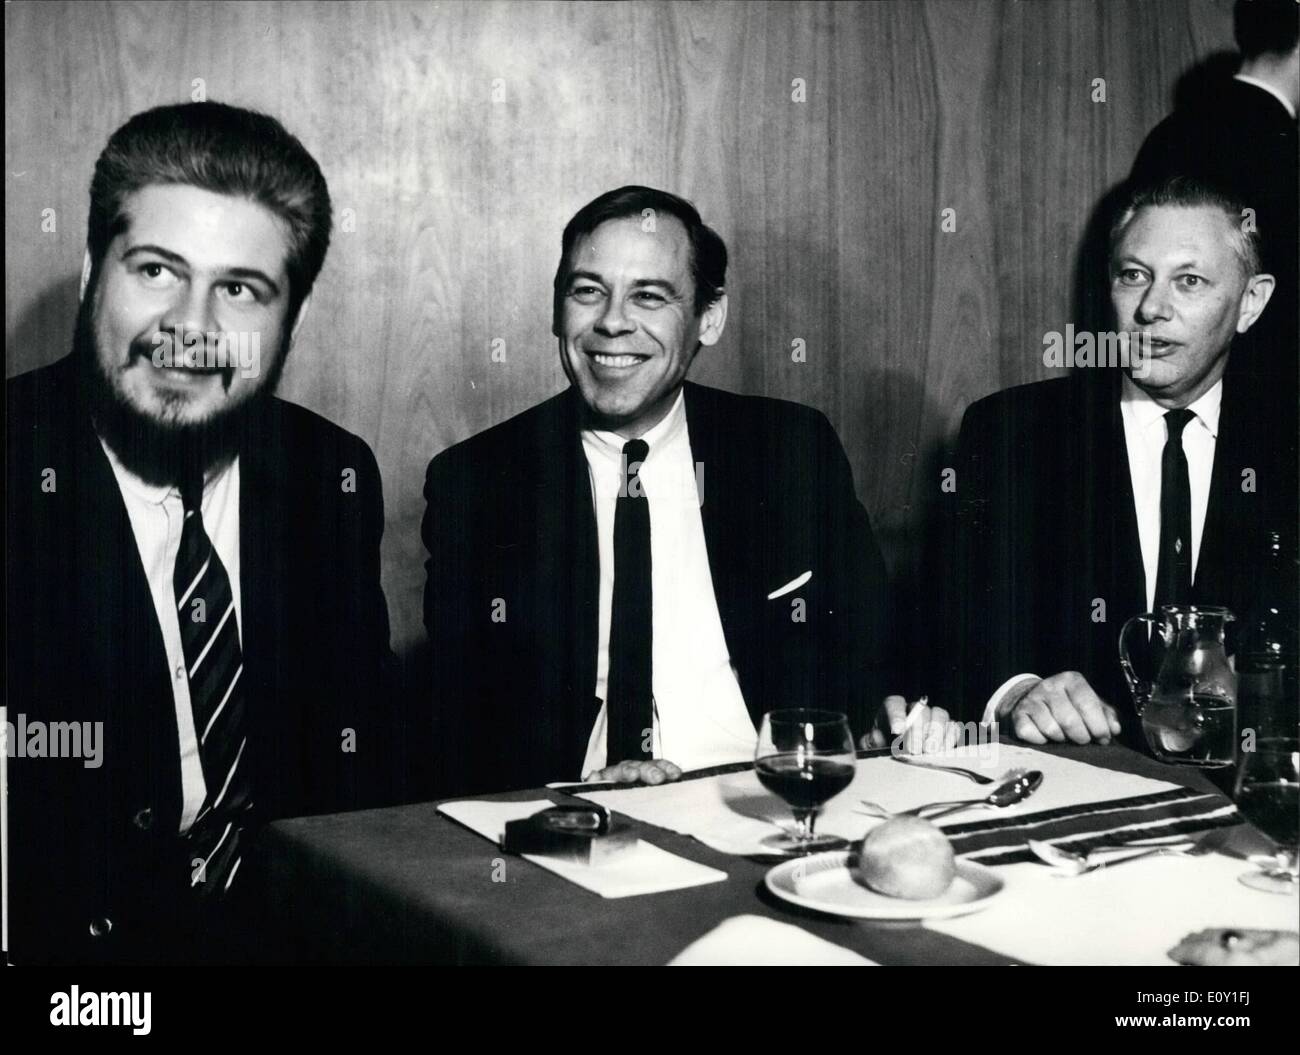 Mar. 03, 1968 - Discussing the film ''In the Heat of the Night'': At Zurich the new American film ''In the heat of the night'' had it's premiere in Switzerland. In the form of a Crime Story this film exp[poses the Problem of White and black people in the USA.Picture Shows from left to right actor Bill Ramsey, Swiss raio commenter Dr. Gautschy and John Ball, the author of the Story. Stock Photo